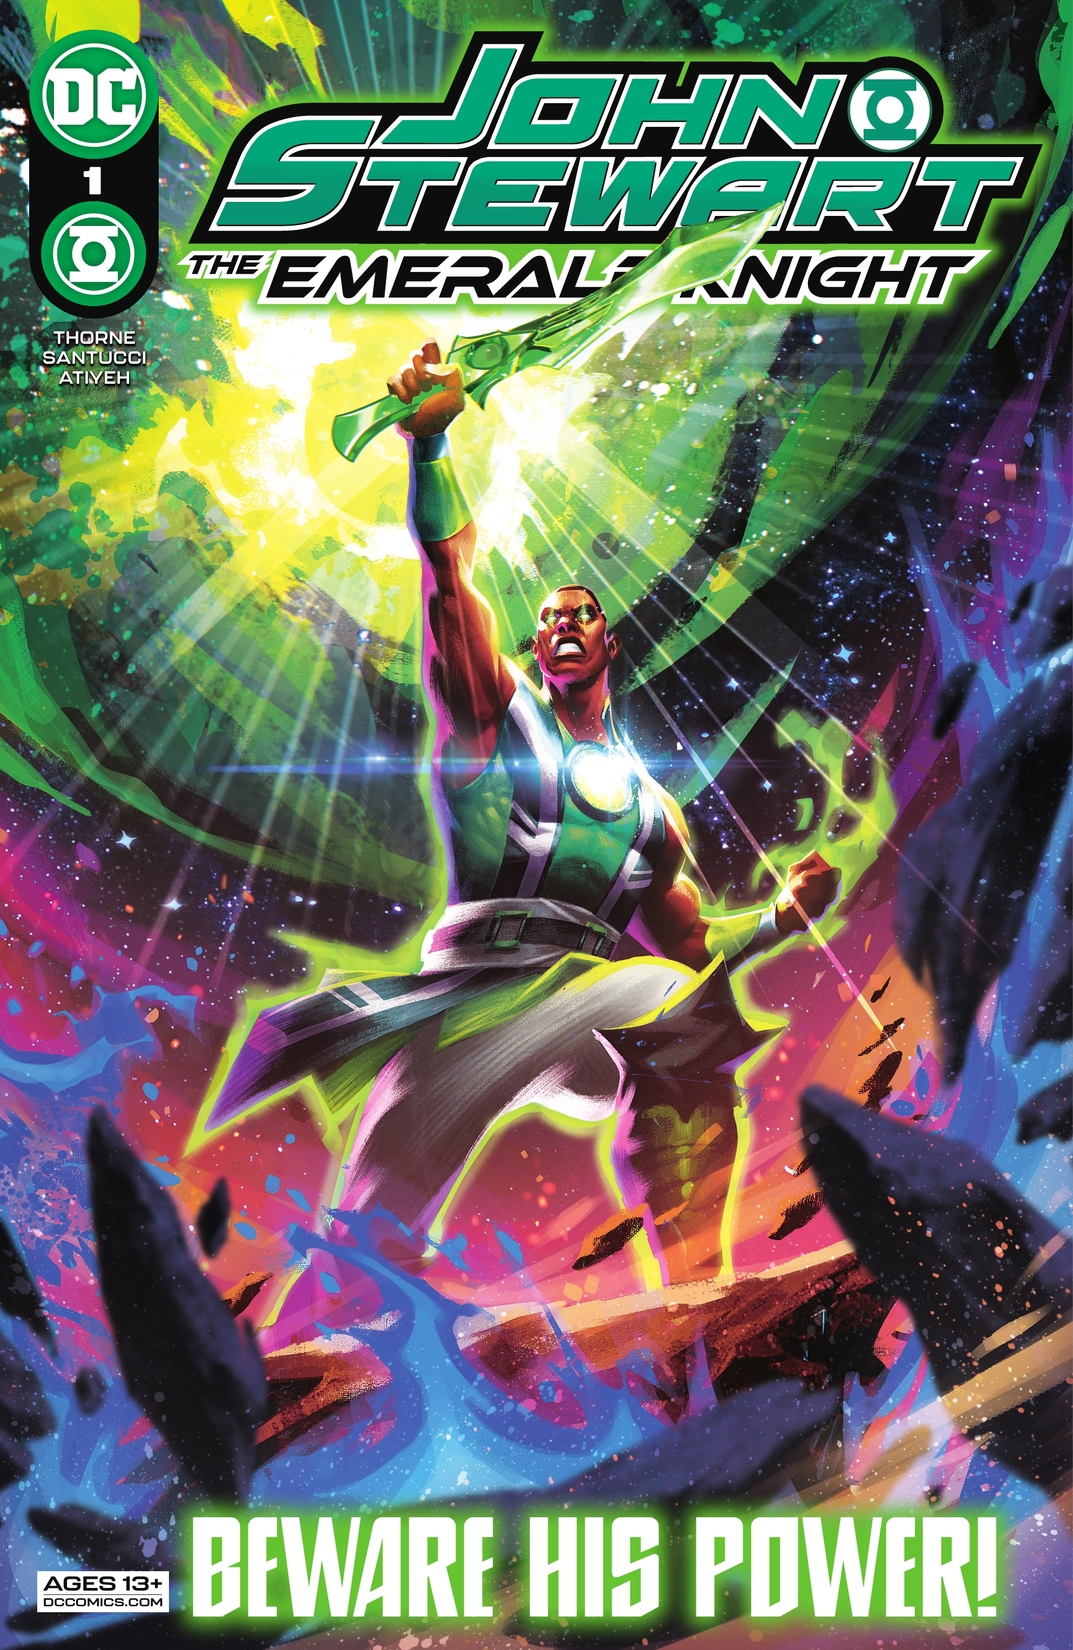 John Stewart: The Emerald Knight #1 preview images